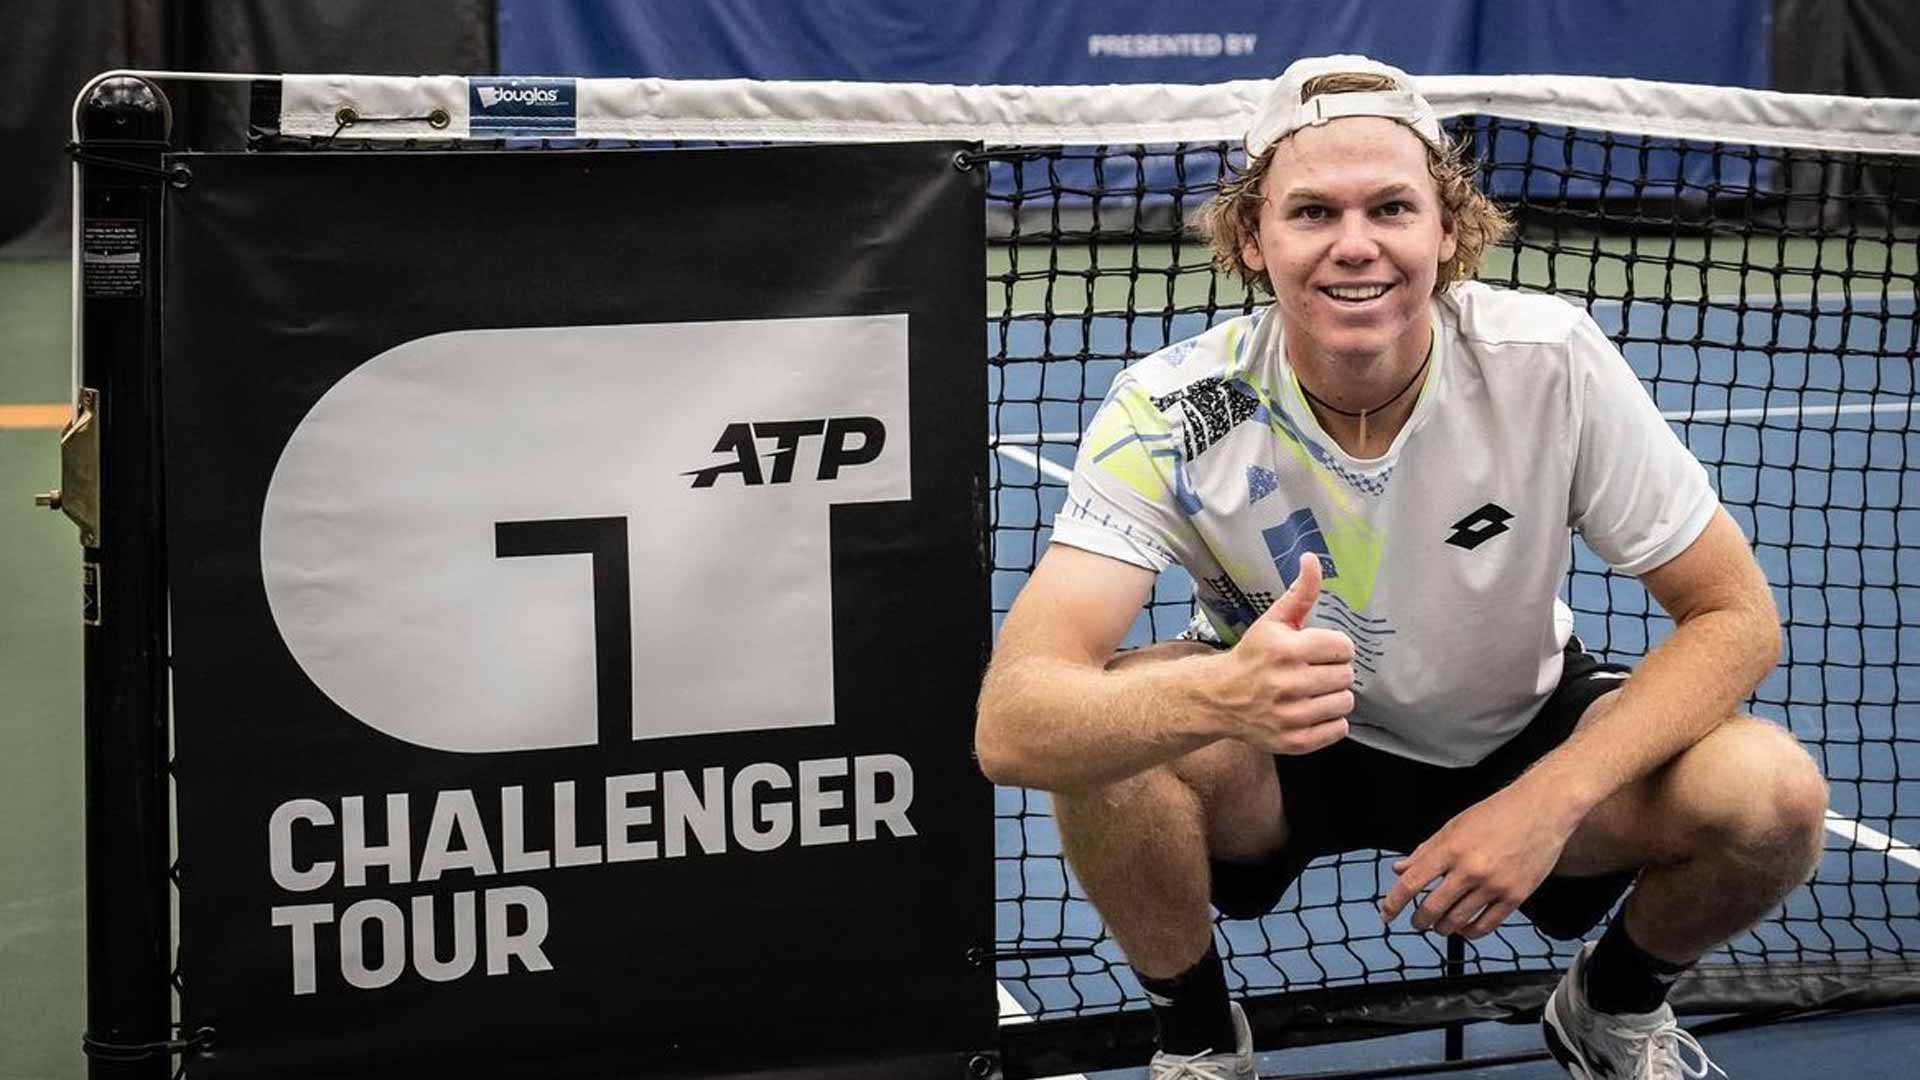 Alex Michelsen wins his second ATP Challenger Tour title in Knoxville, Tennessee.